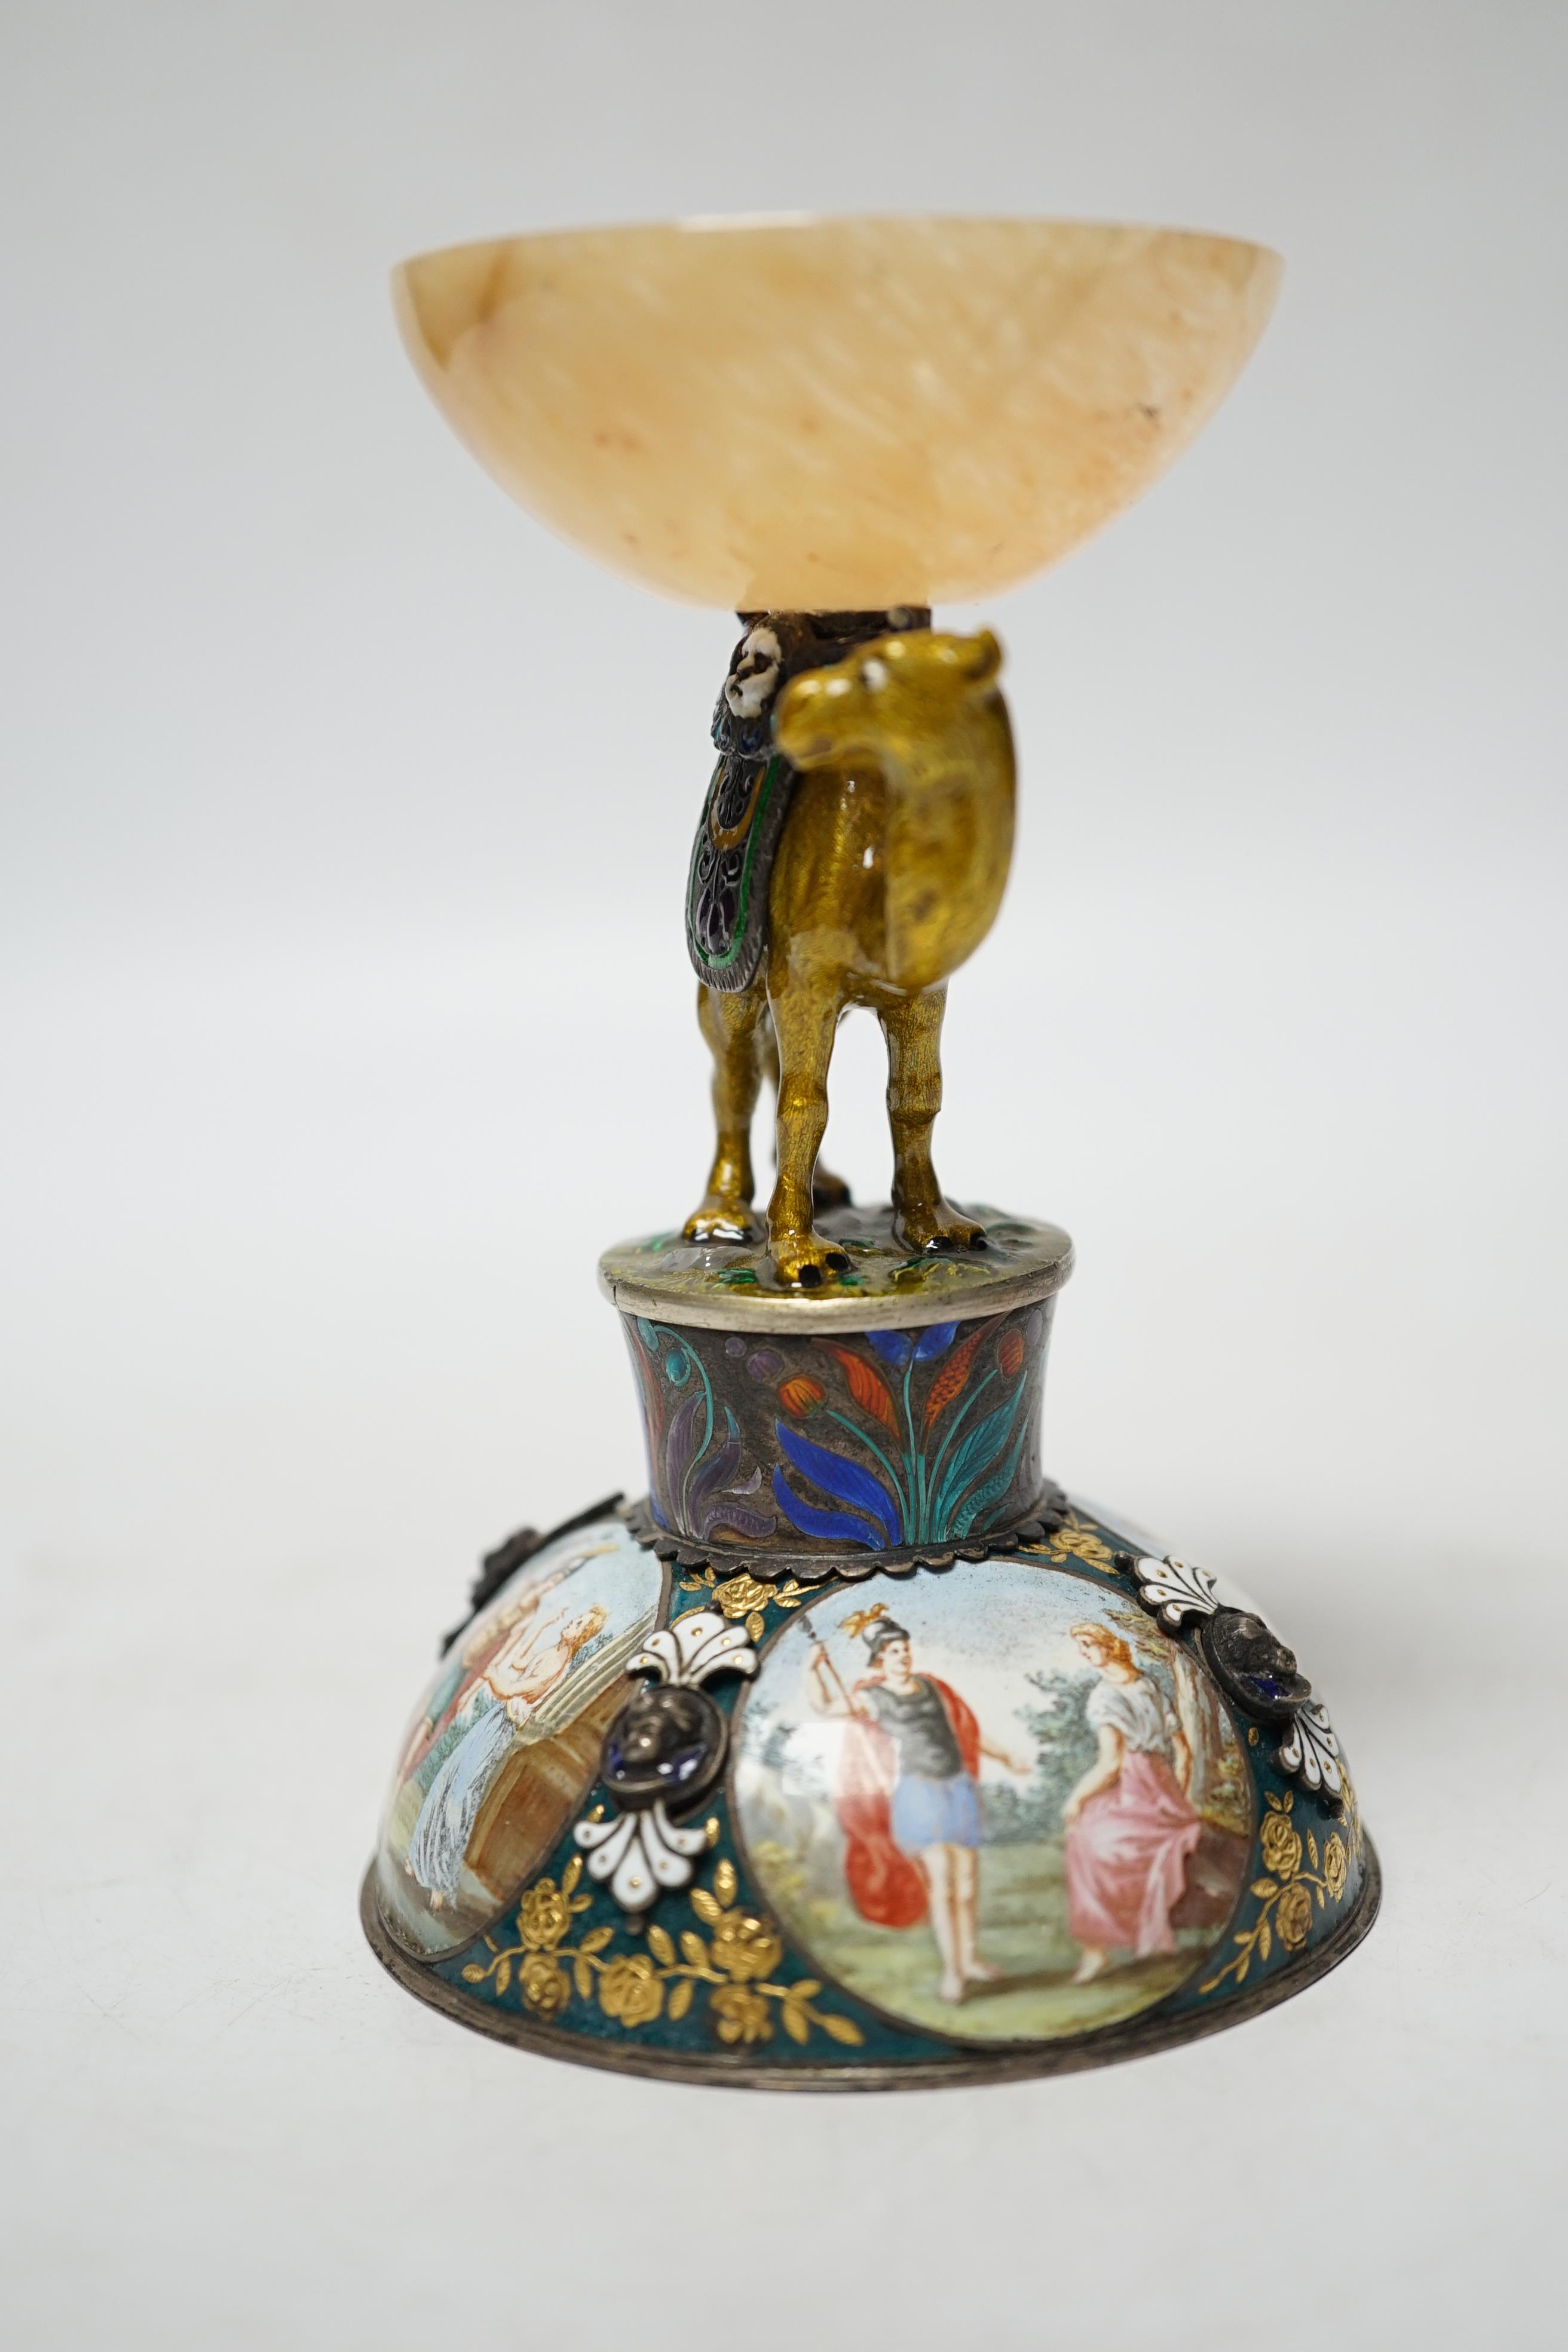 A 19th century Viennese? white metal, polychrome enamel and onyx mounted small centrepiece decorated with figural scenes, the stem in the form of a camel, height 10.7cm.